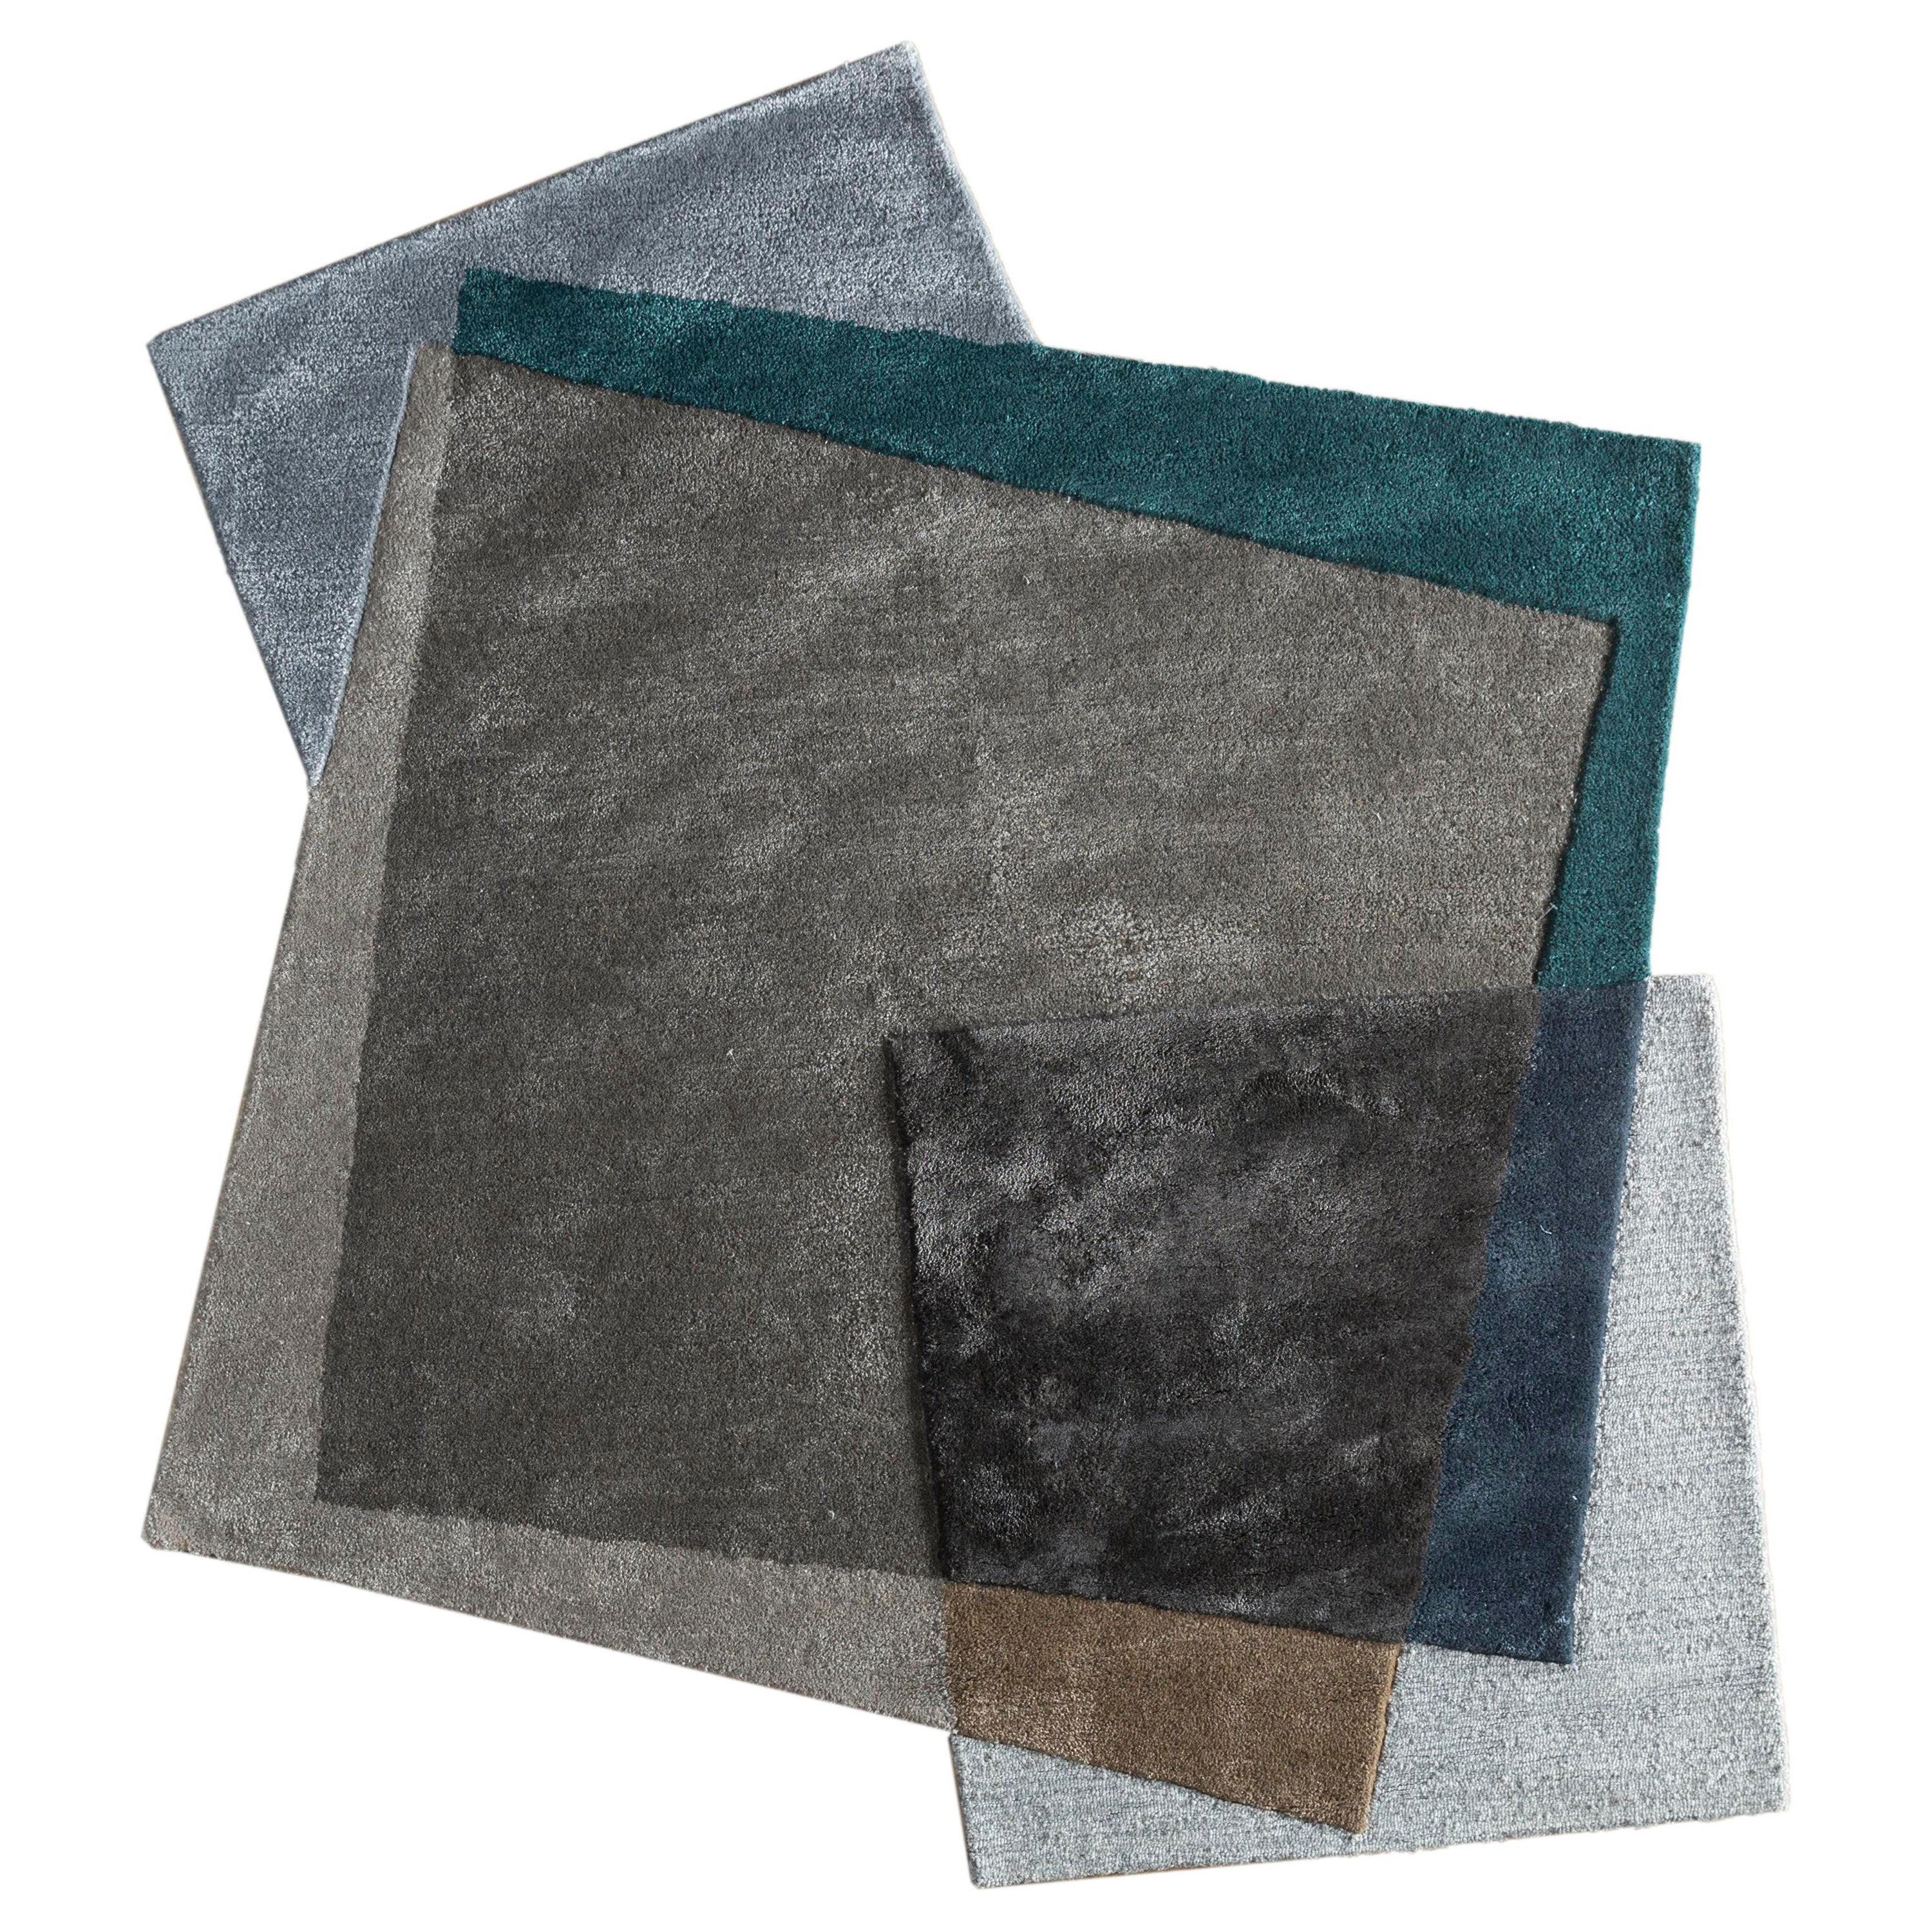 ArtCraft Fusion Charcoal Slate & Pearl Blue 165X150 cm Hand Tufted Rug For Sale